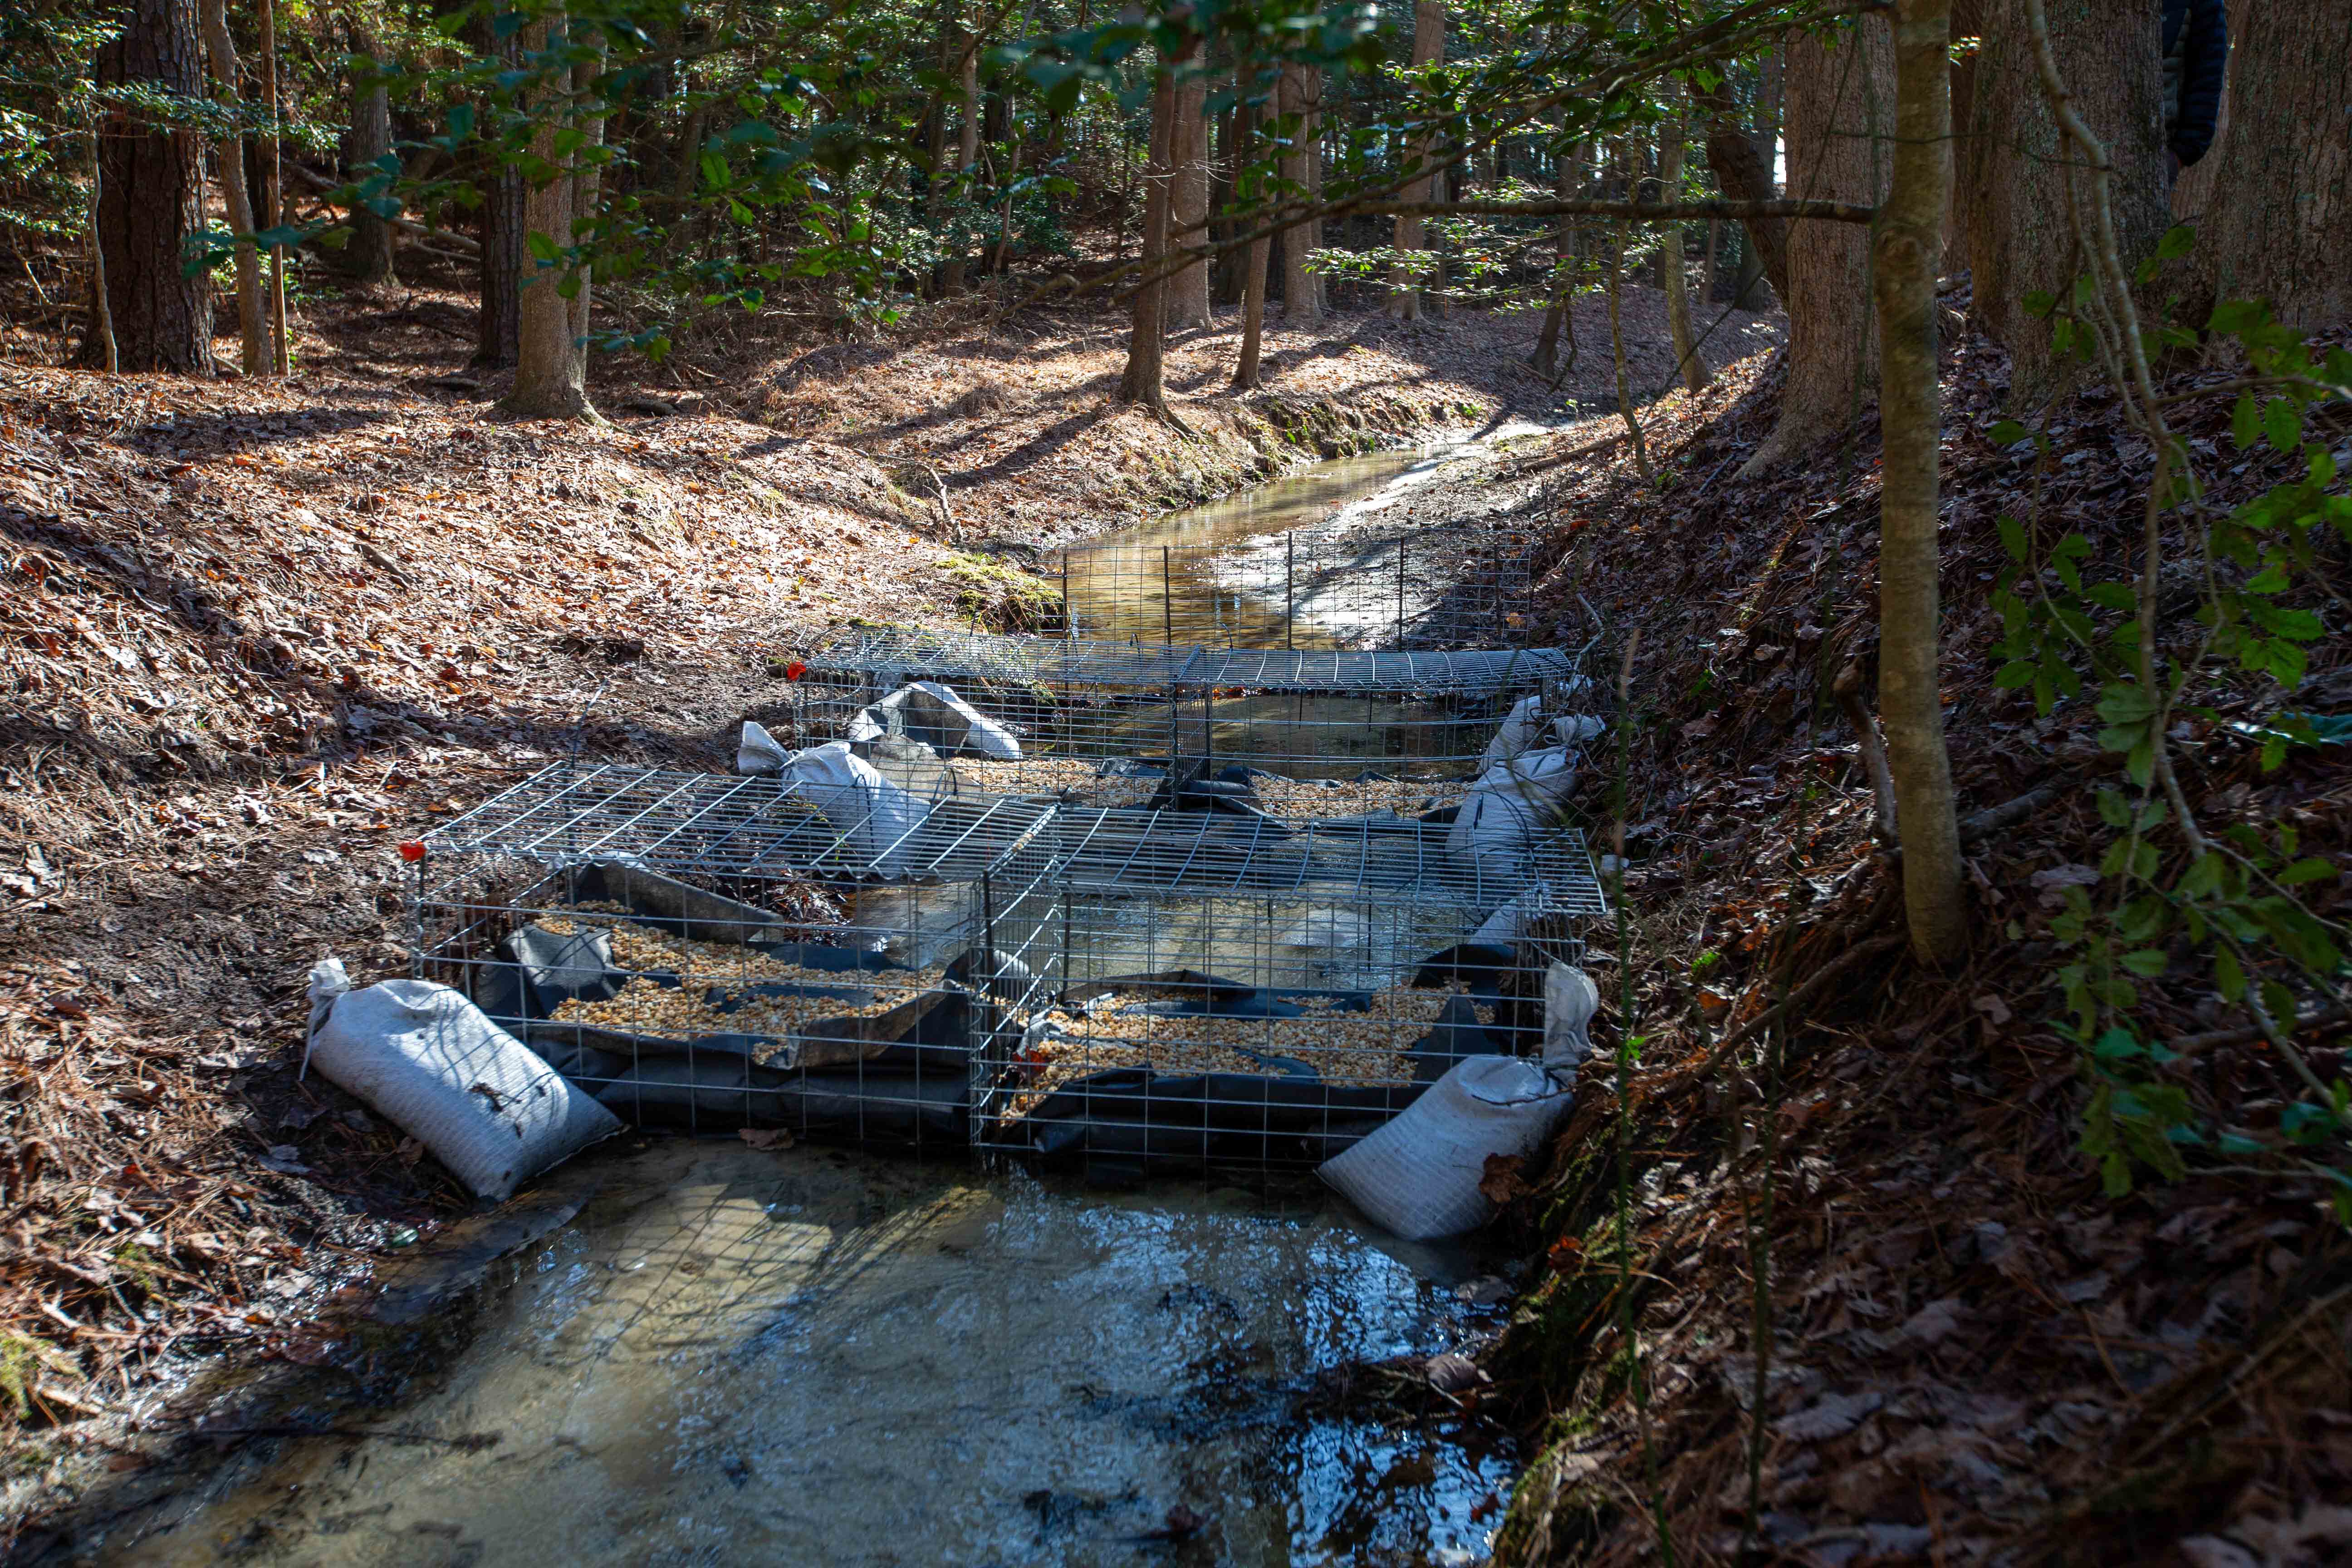 A stream running through a forested area with multiple wire cages.